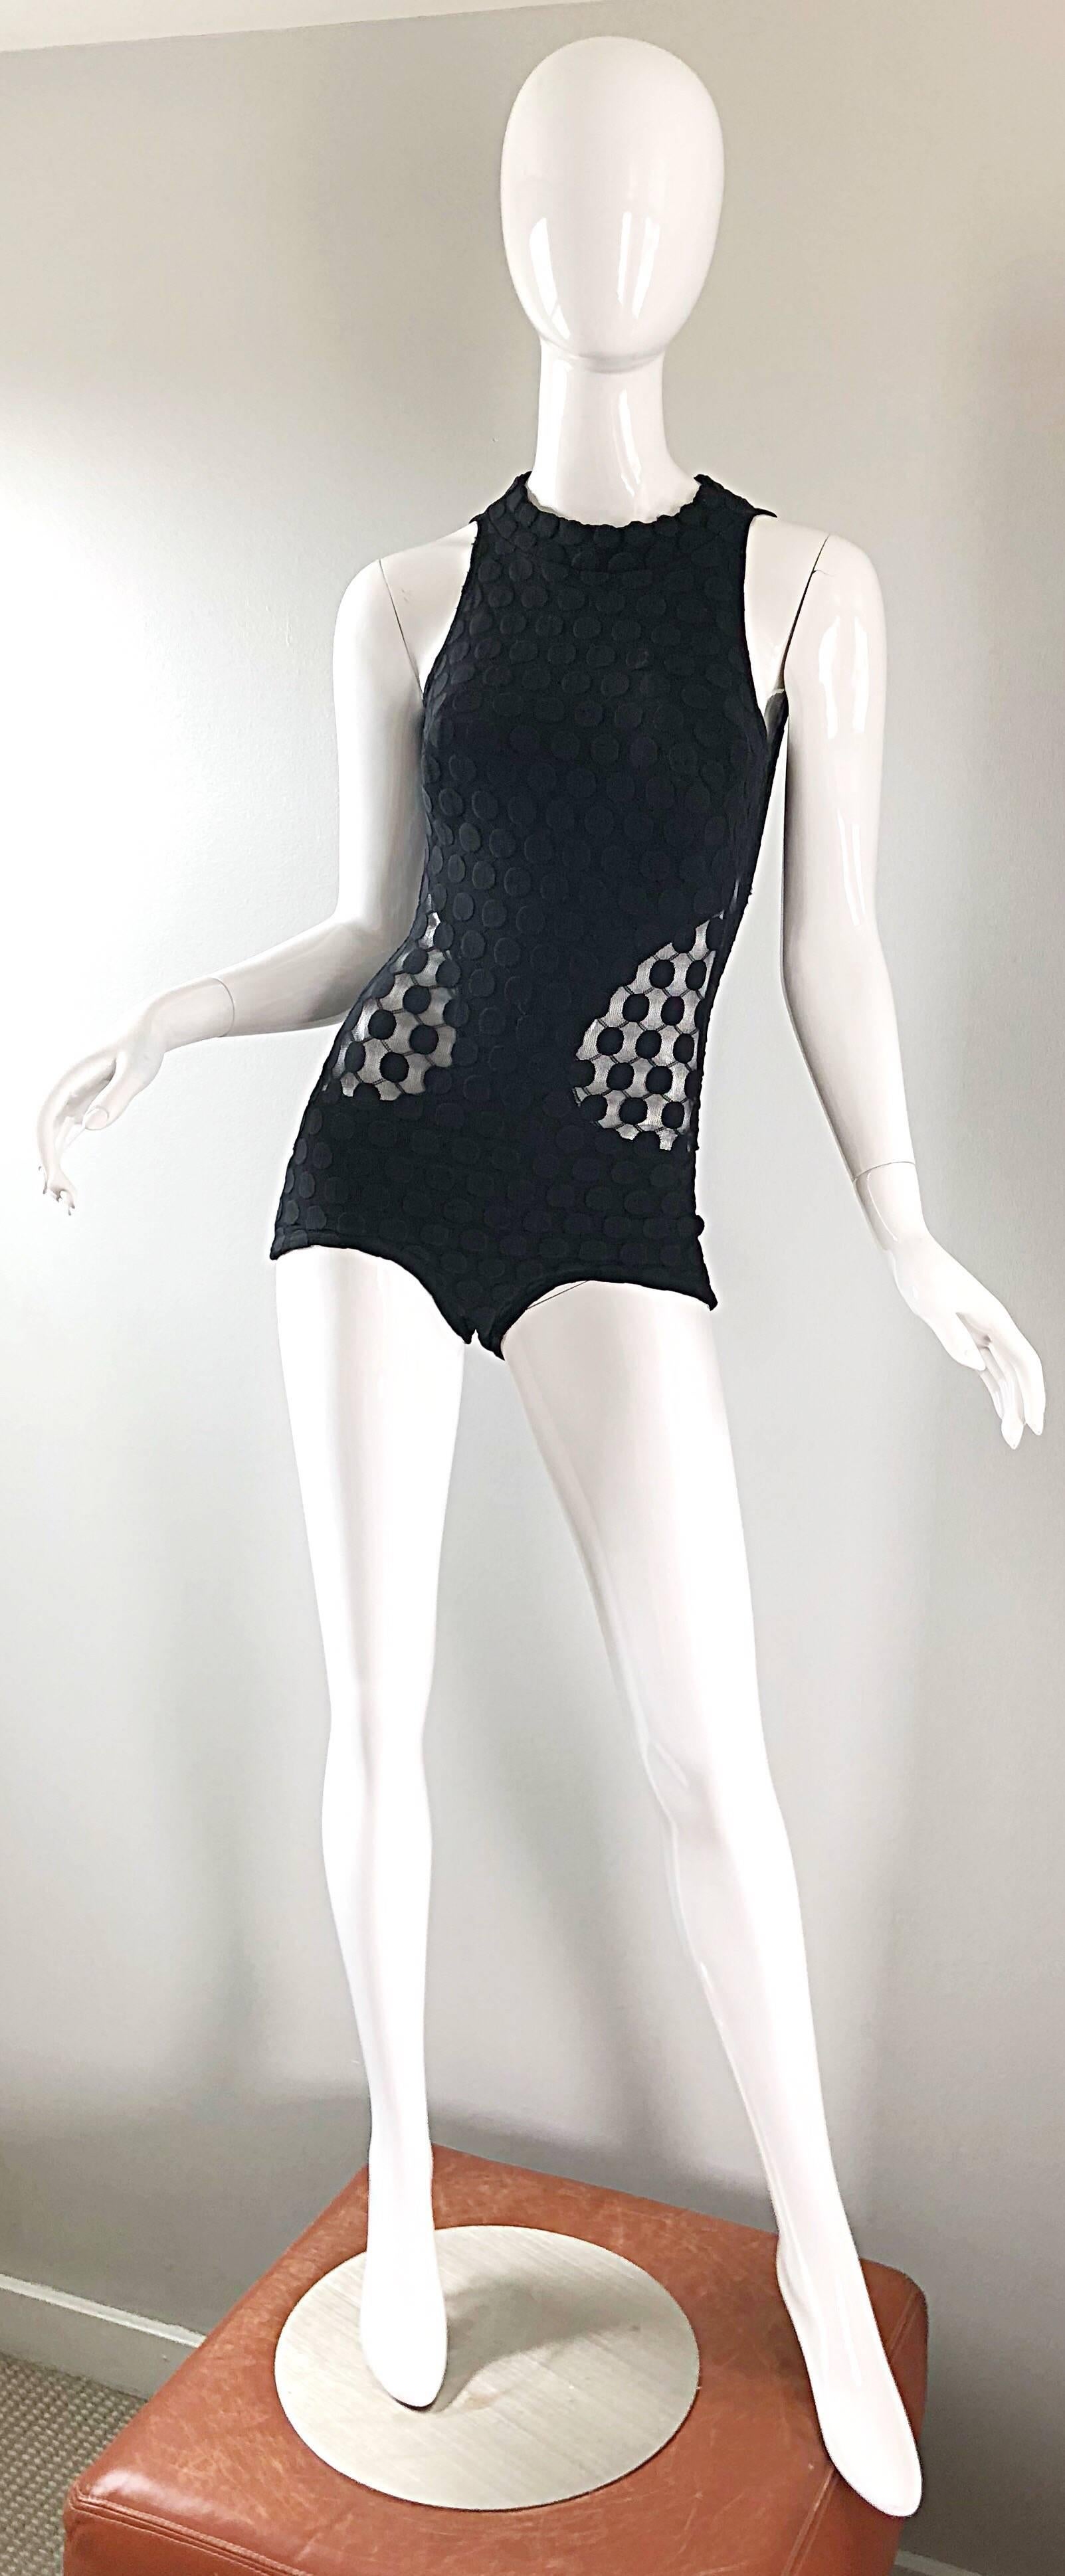 Sexy and rare 1960s GOTTEX black one piece swimsuit or bodysuit with sheer cut-out sides! Features a high neck with an open back. Black on black polka dot print. Semi sheer cut-outs at the side reveal just the right amount of skin. Large